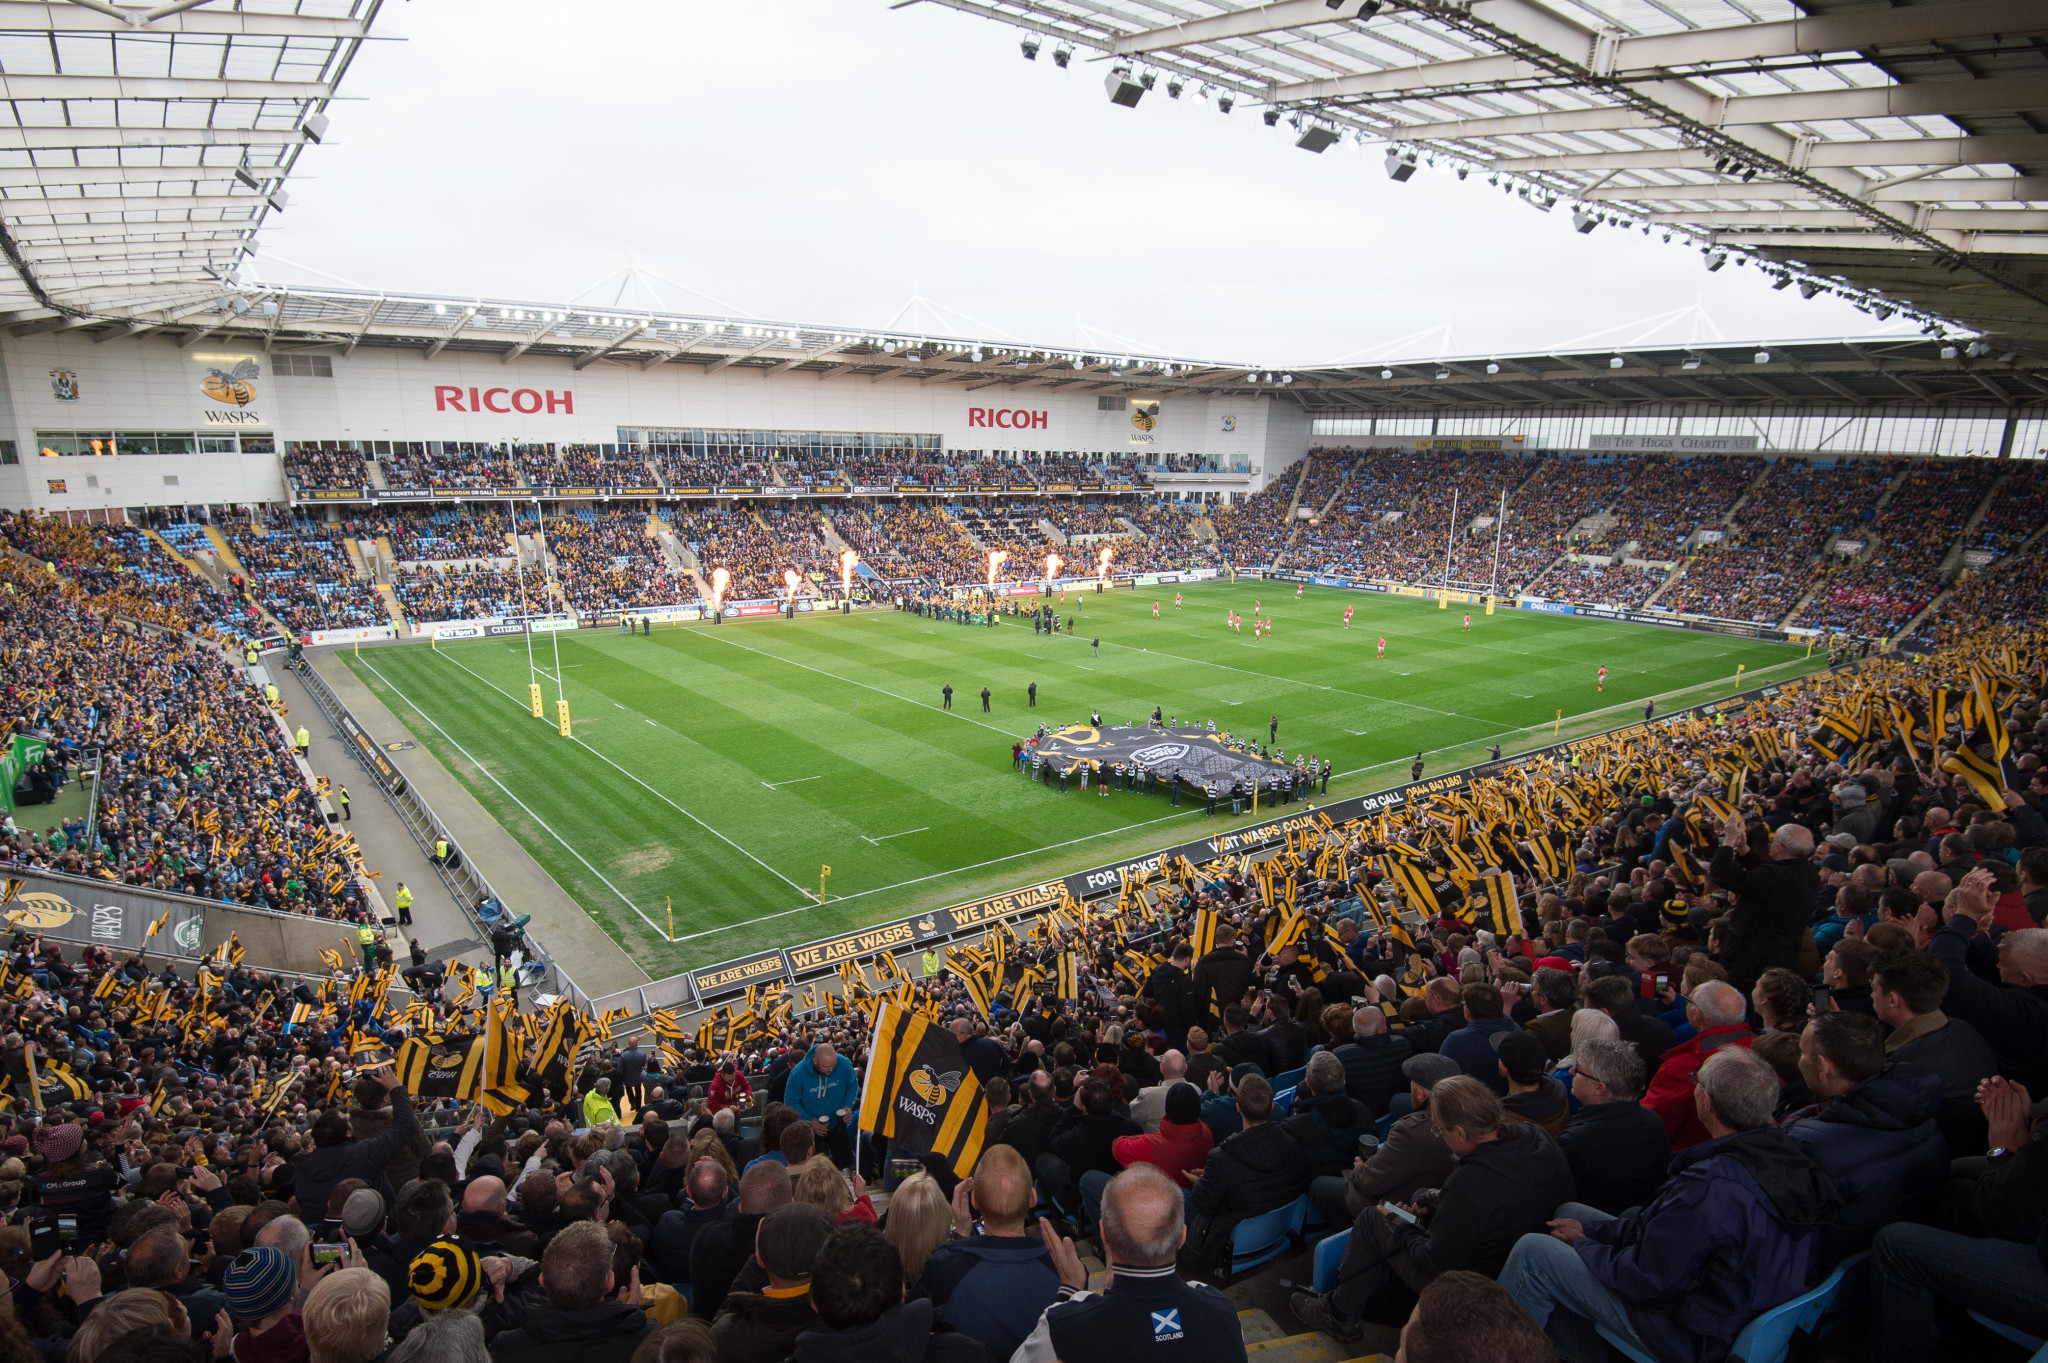 The Ricoh Arena in Coventry is the home ground of Premiership Rugby club Wasps ©Getty Images